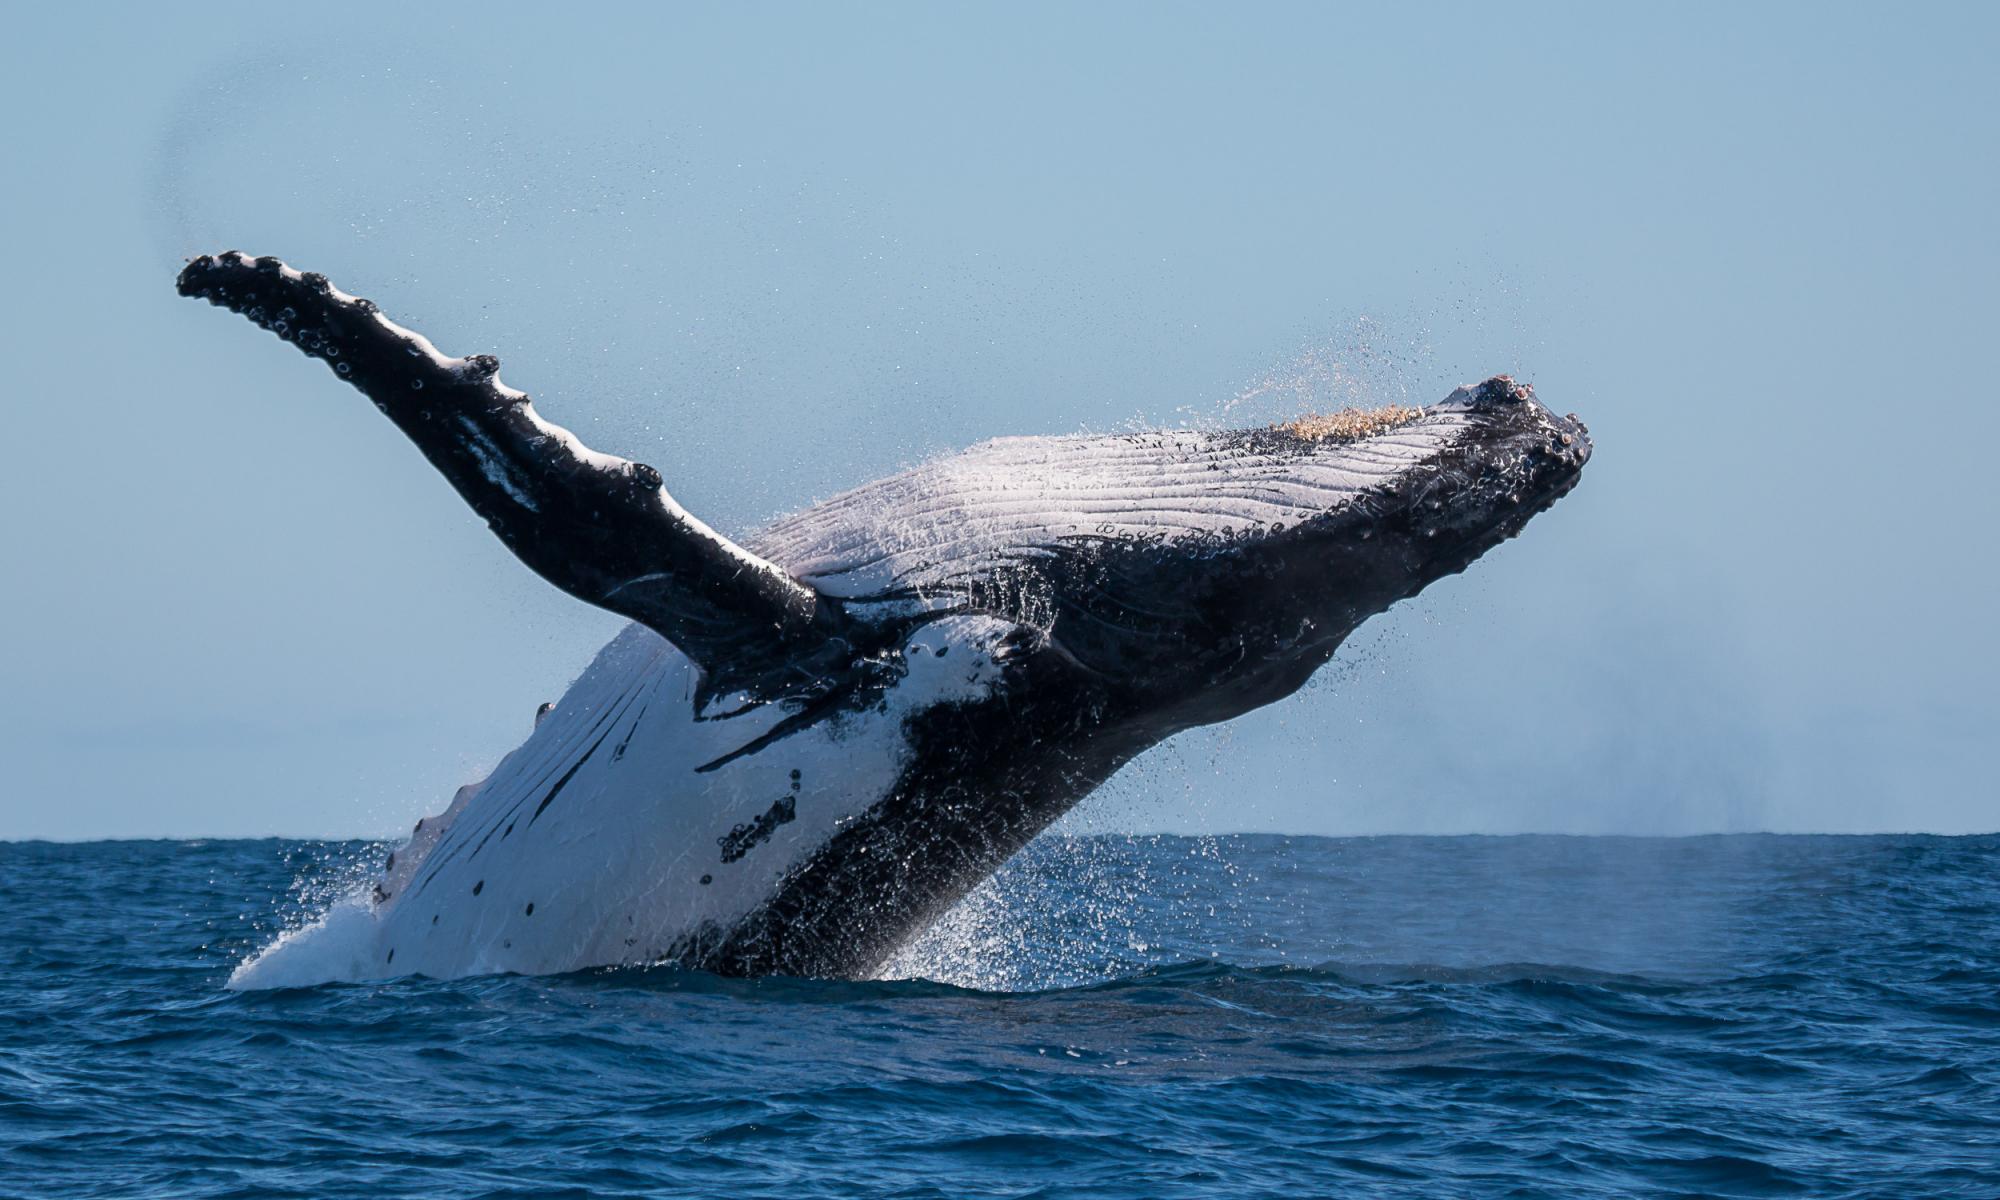 Humpback whales removed from Australia’s threatened species list but feeding grounds still at risk